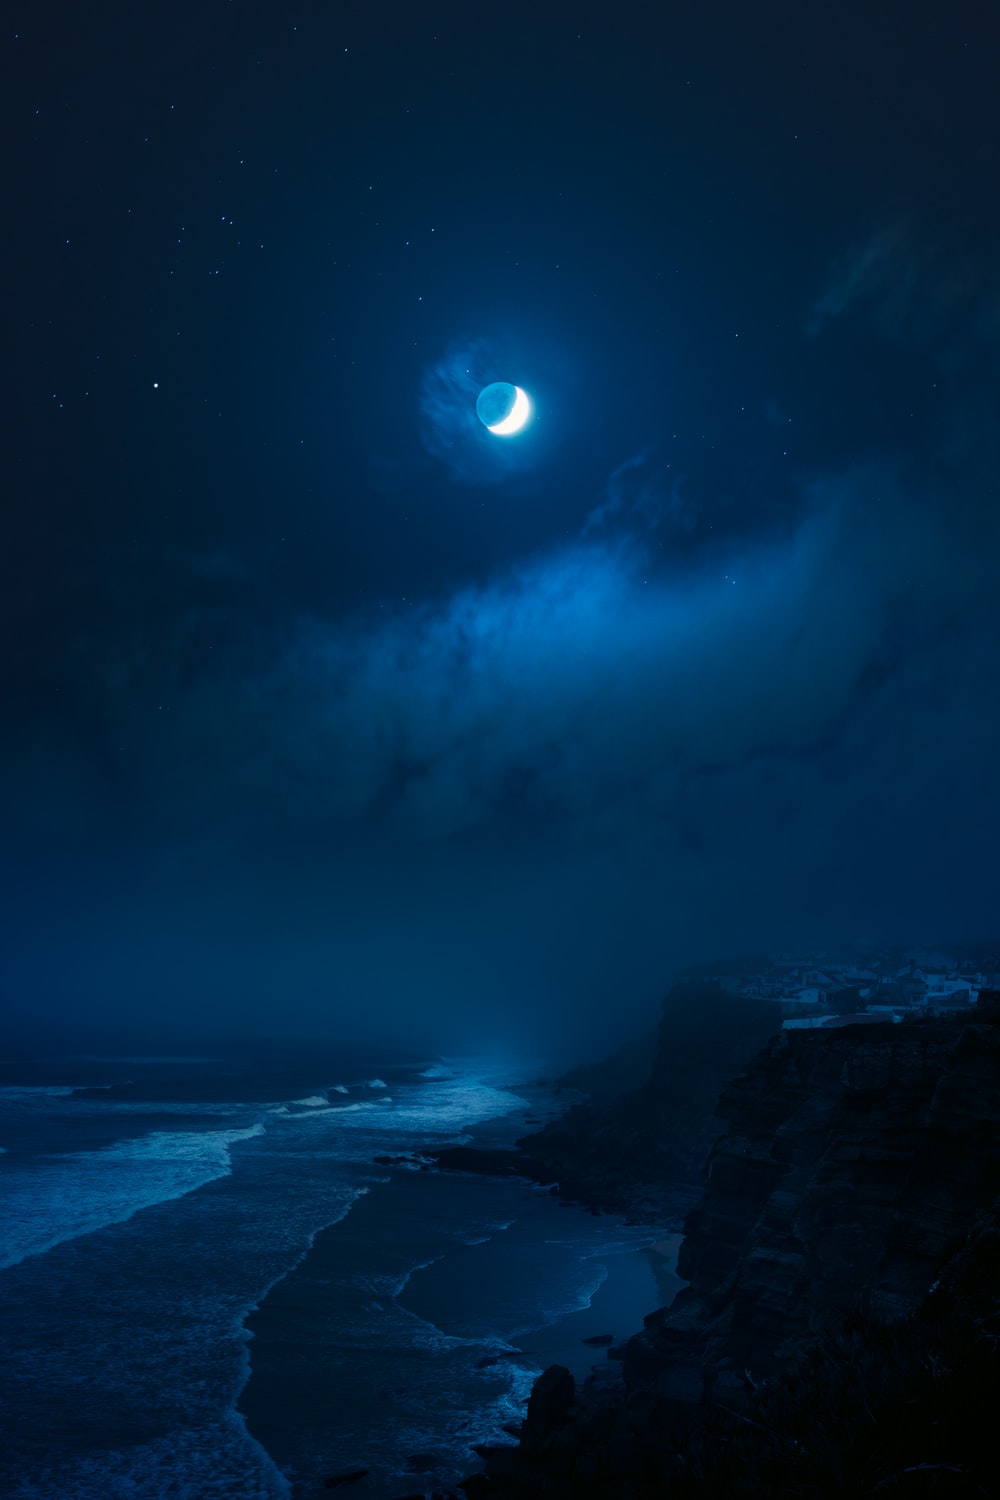 Ocean Night Picture [Stunning!]. Download Free Image